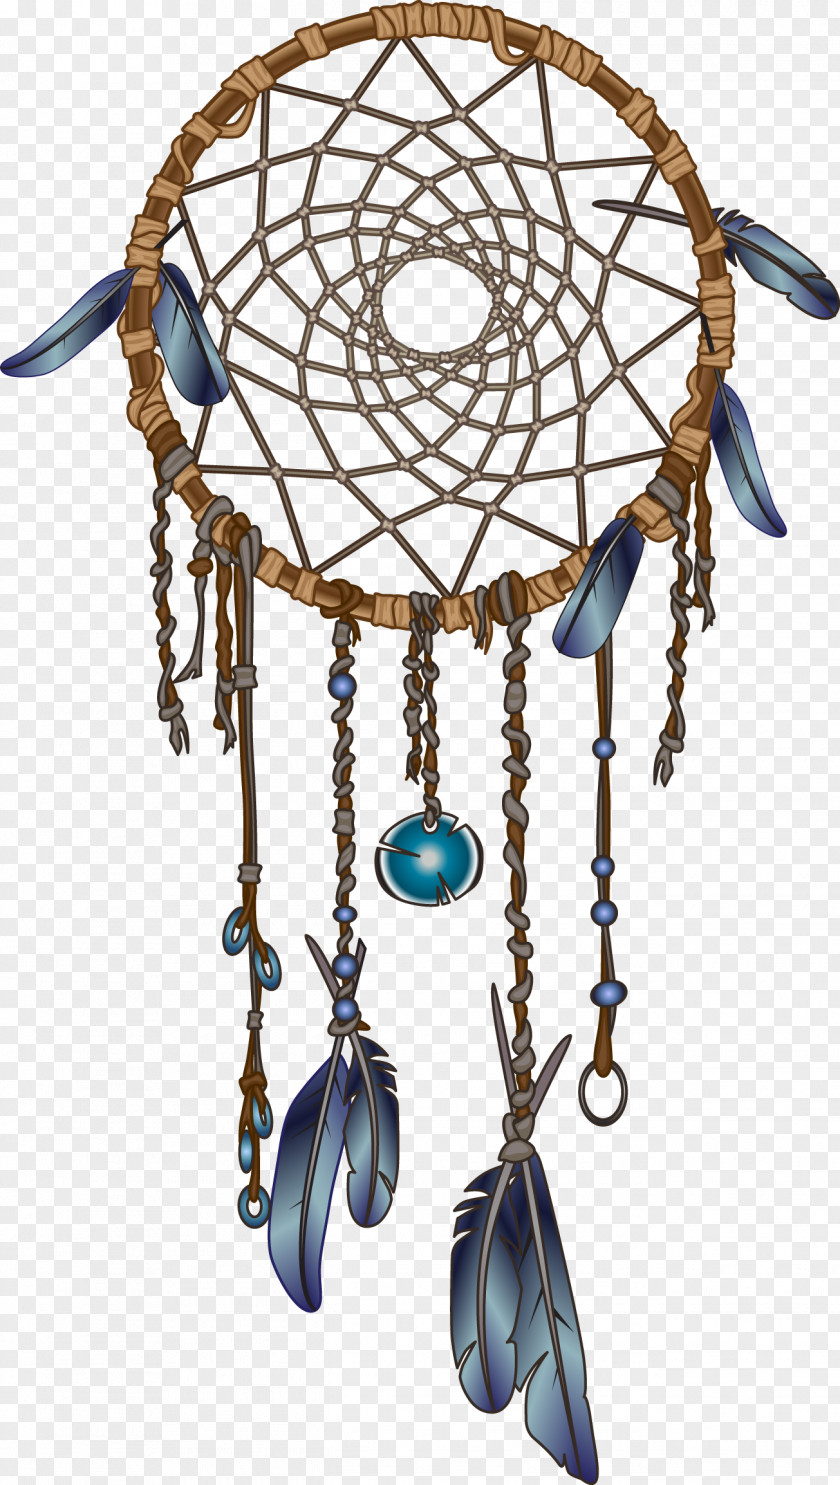 Special Dreamcatcher Royalty-free Stock Photography Clip Art PNG